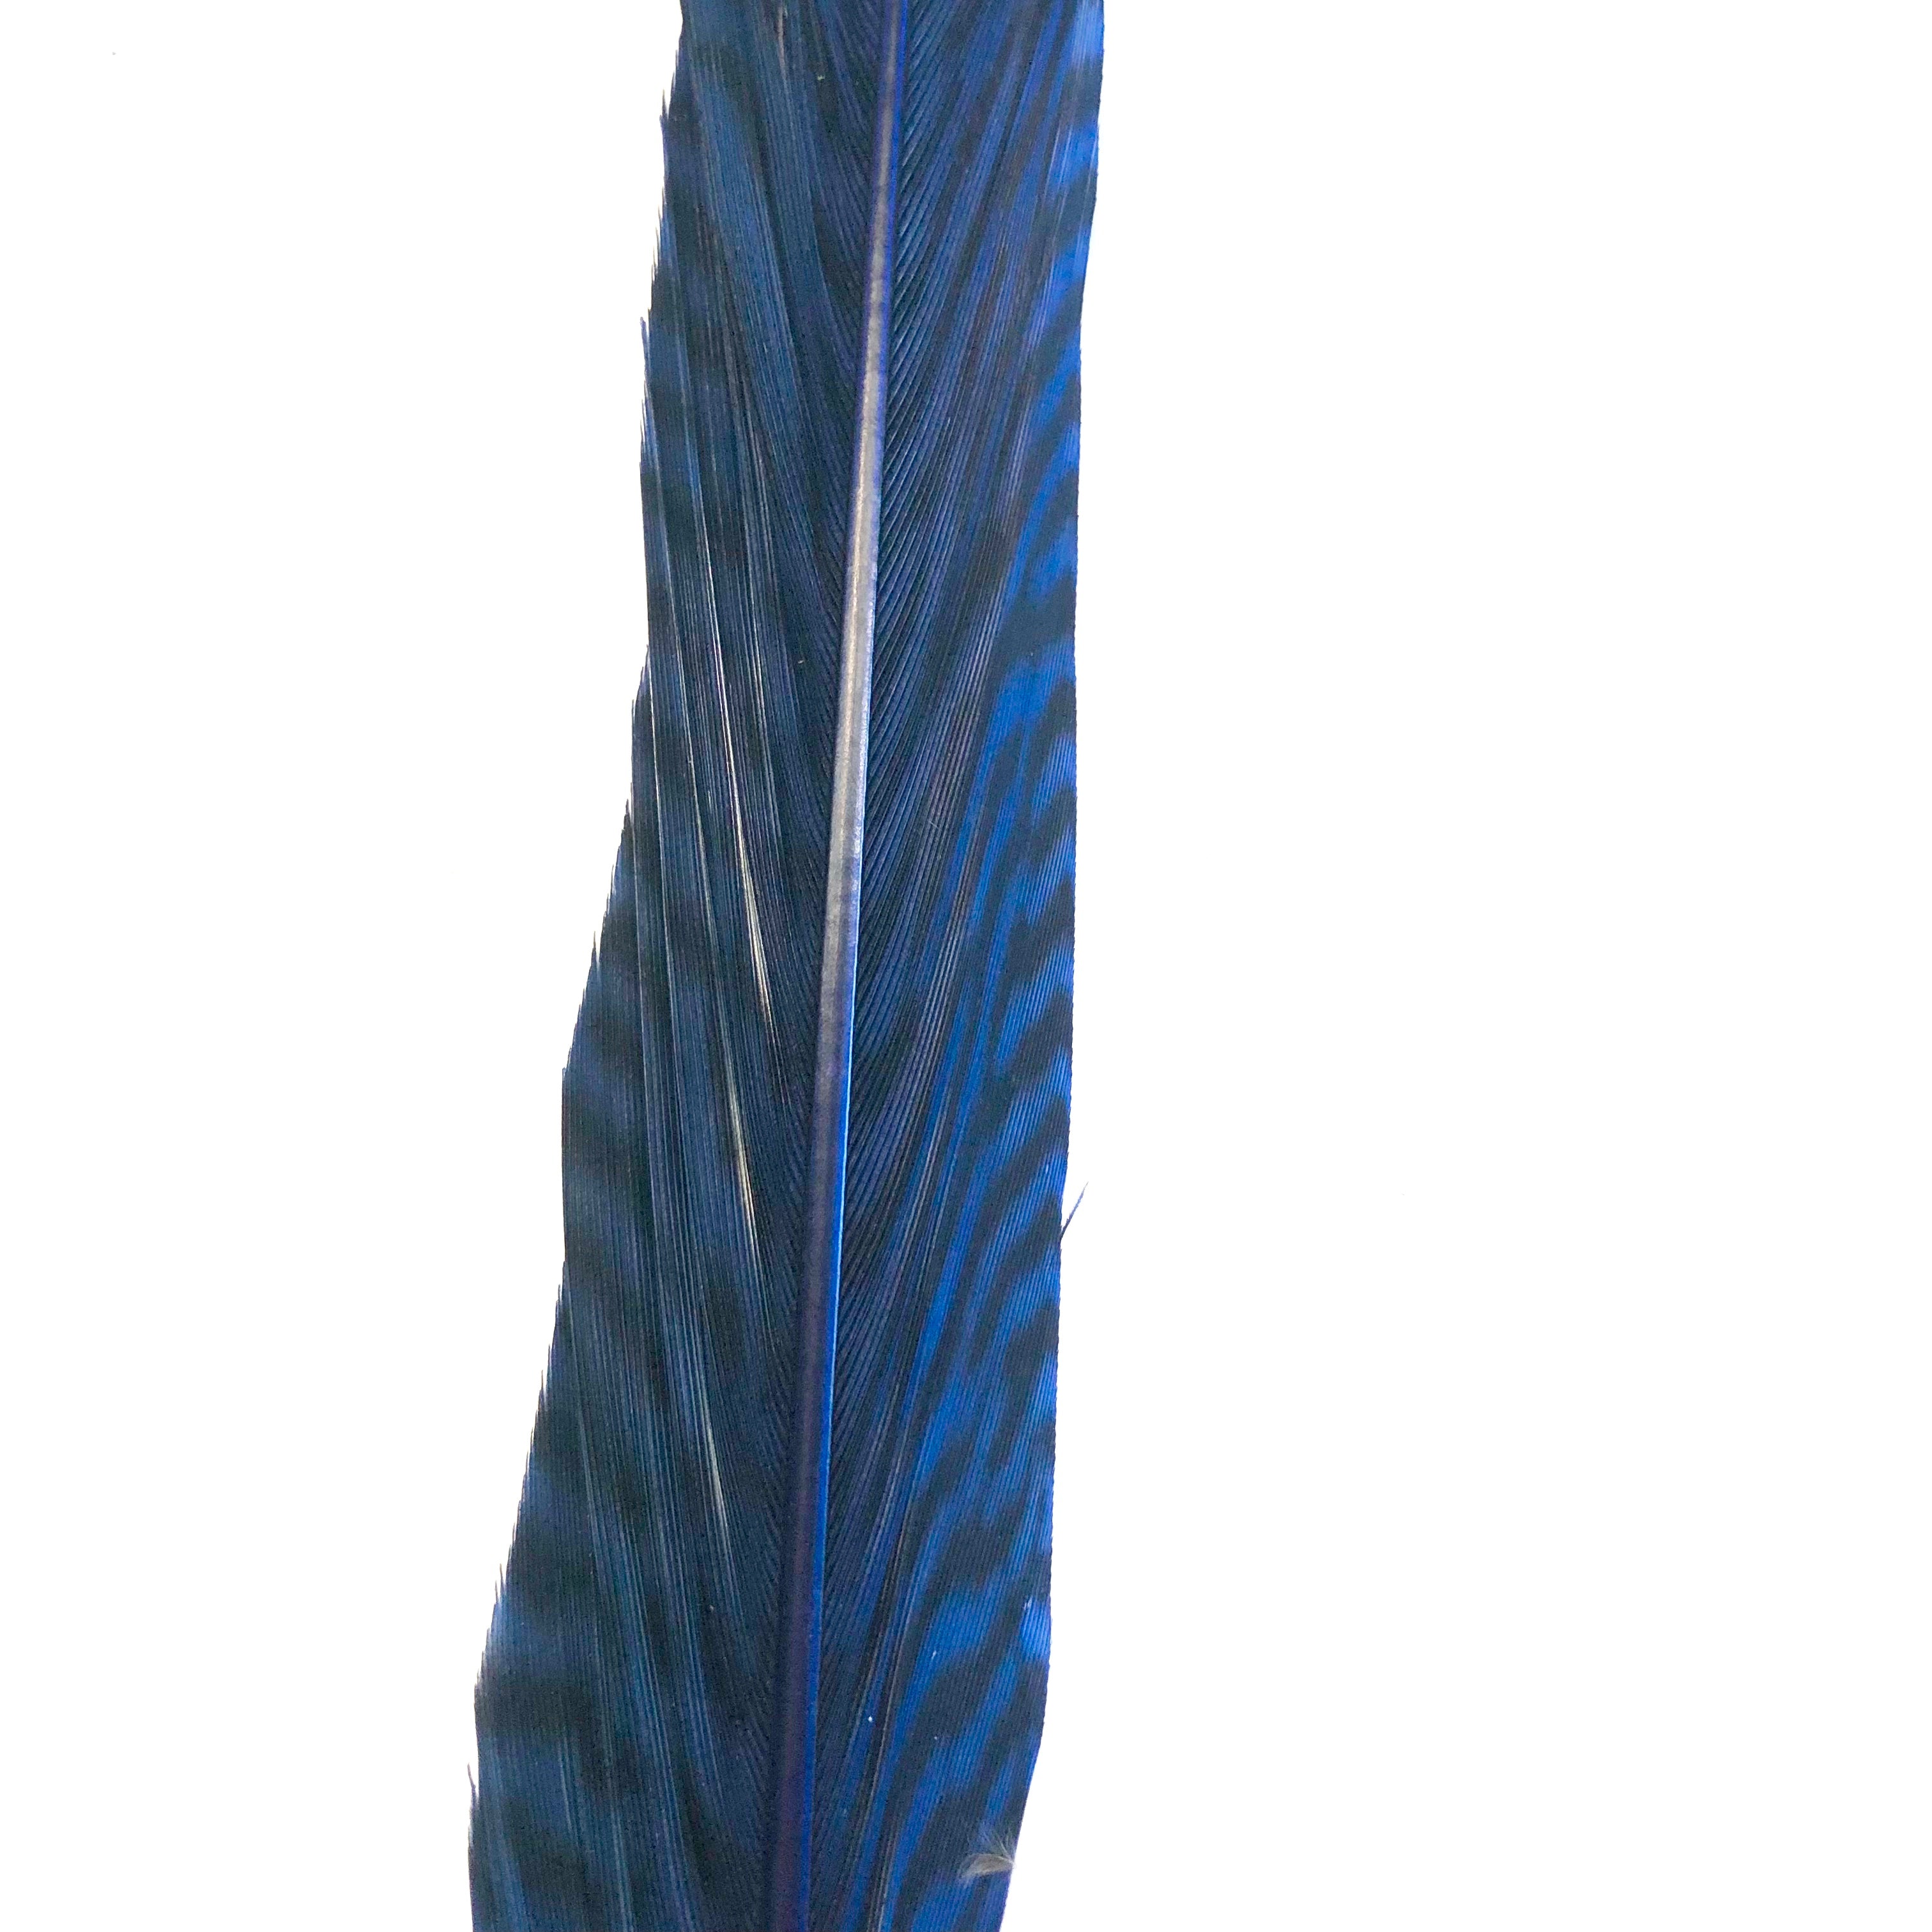 10" to 20" Golden Pheasant Side Tail Feather - Royal Blue ((SECONDS))